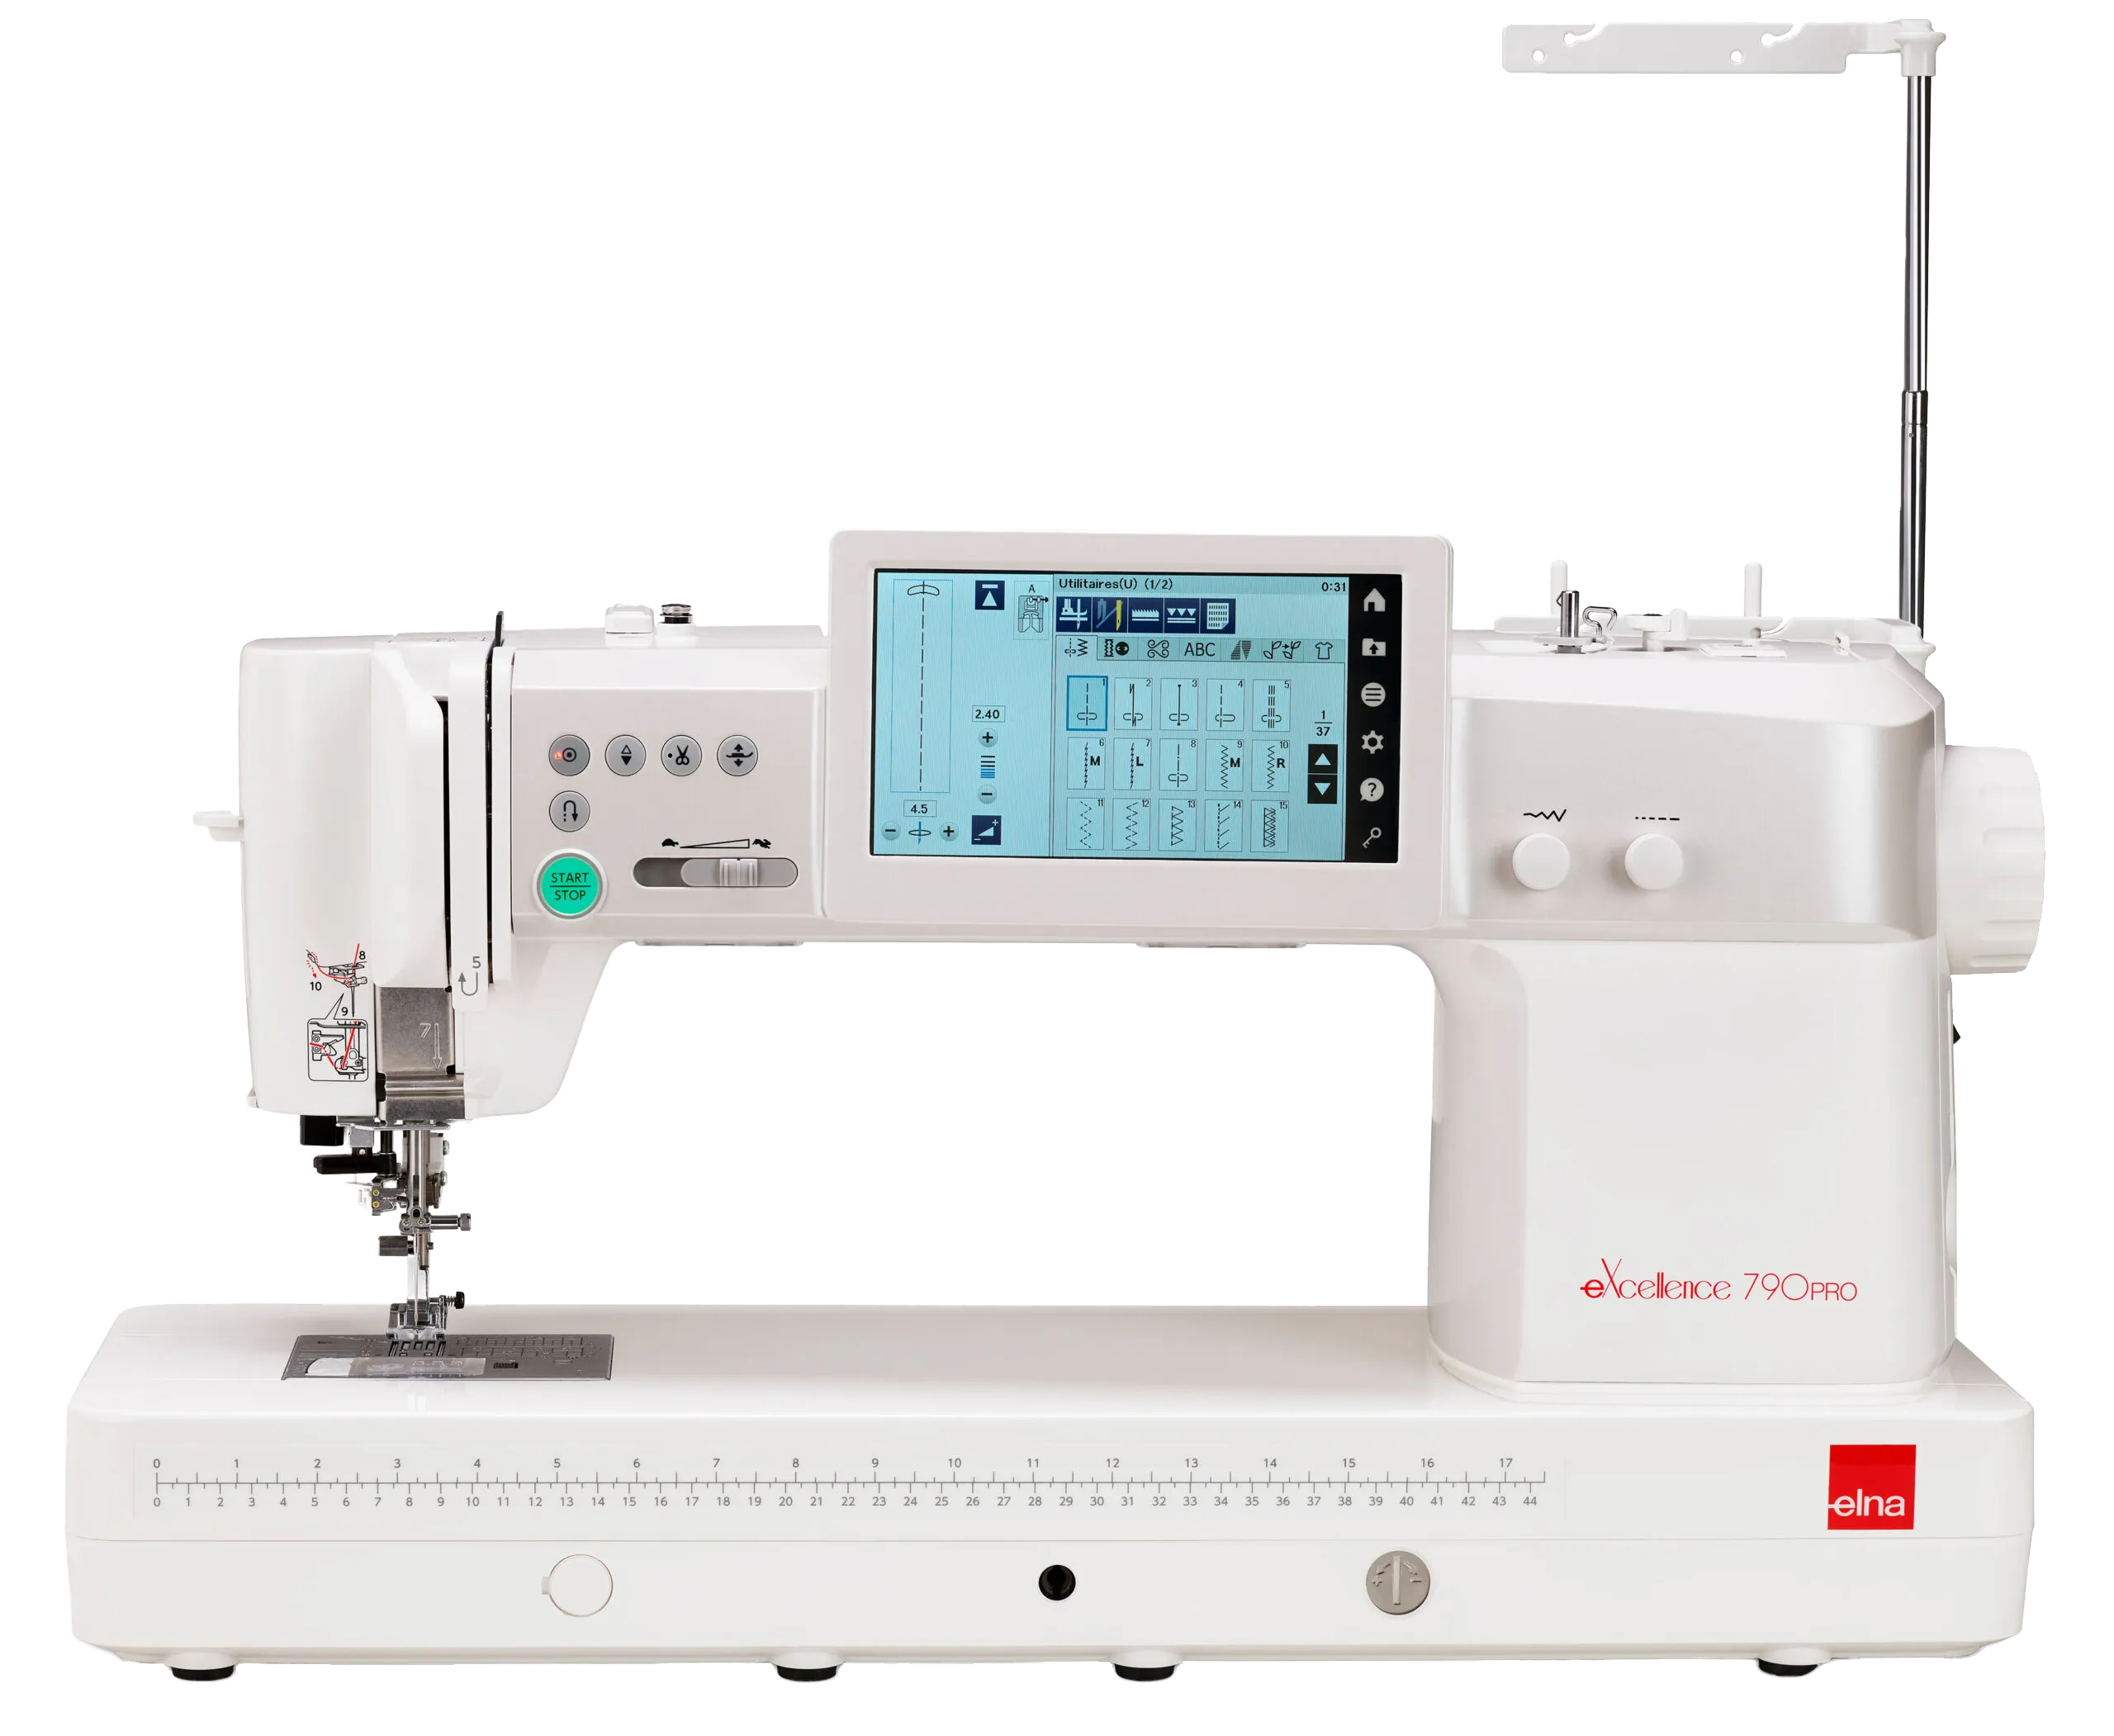 elna eXcellence 790 Pro Sewing Machine 